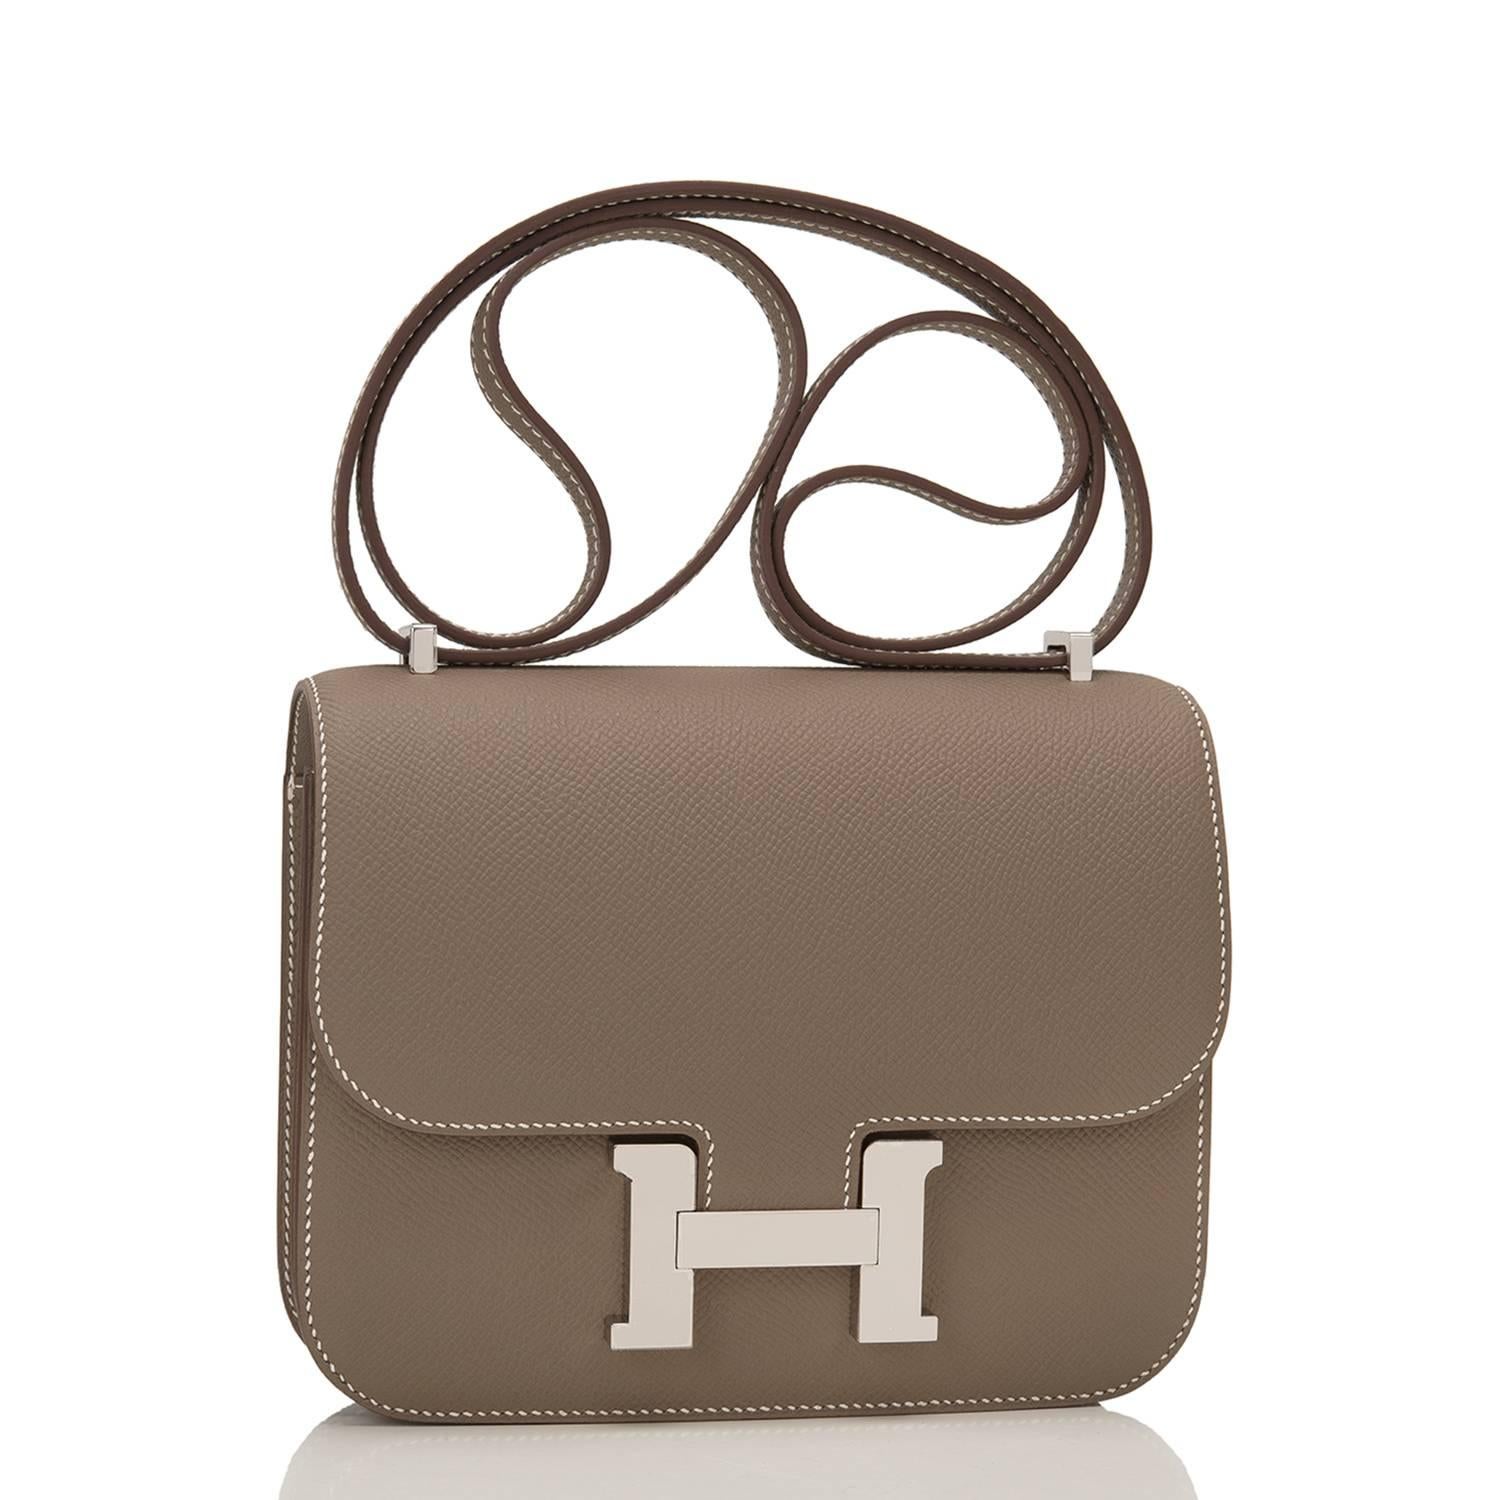 Hermes Etoupe Mini Constance 18cm of epsom leather with palladium hardware.

This Constance has contrast stitching, a metal